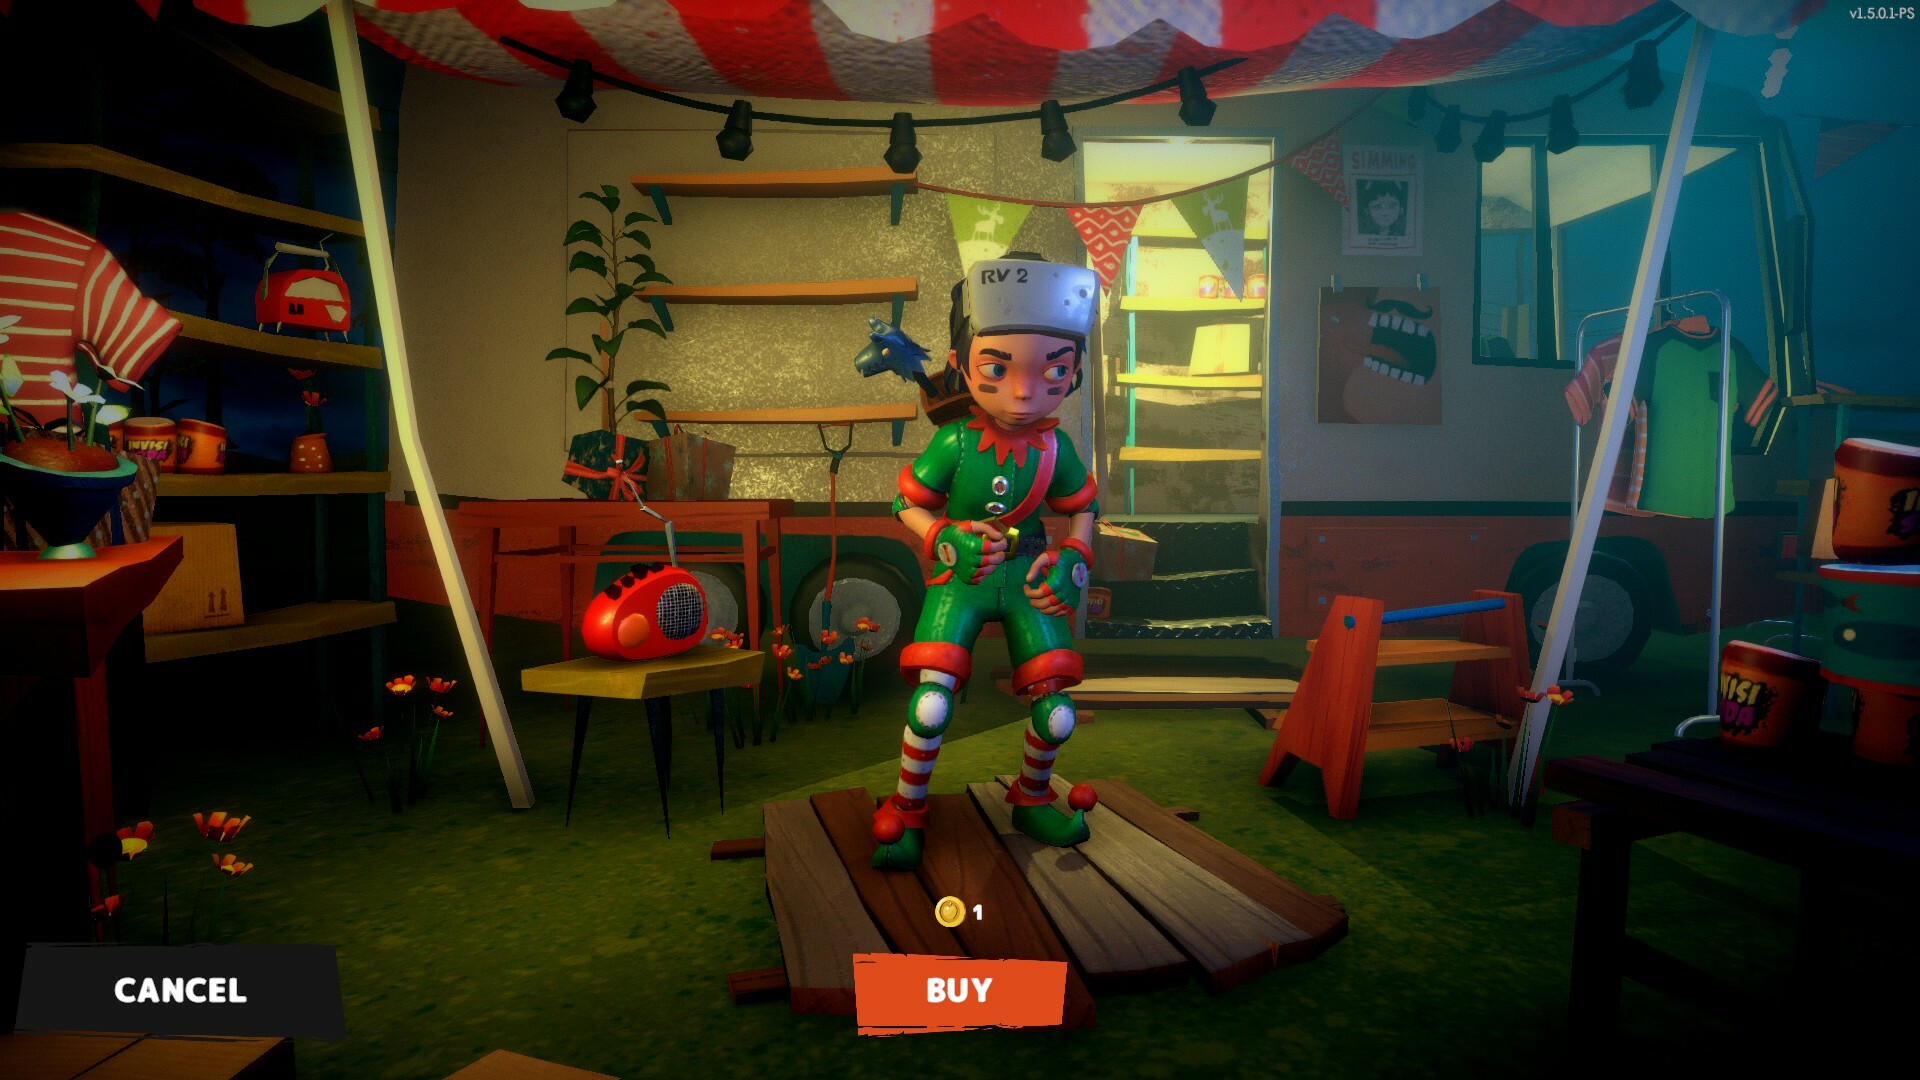 How to Download & Install Secret Neighbor Game on PC in Hindi